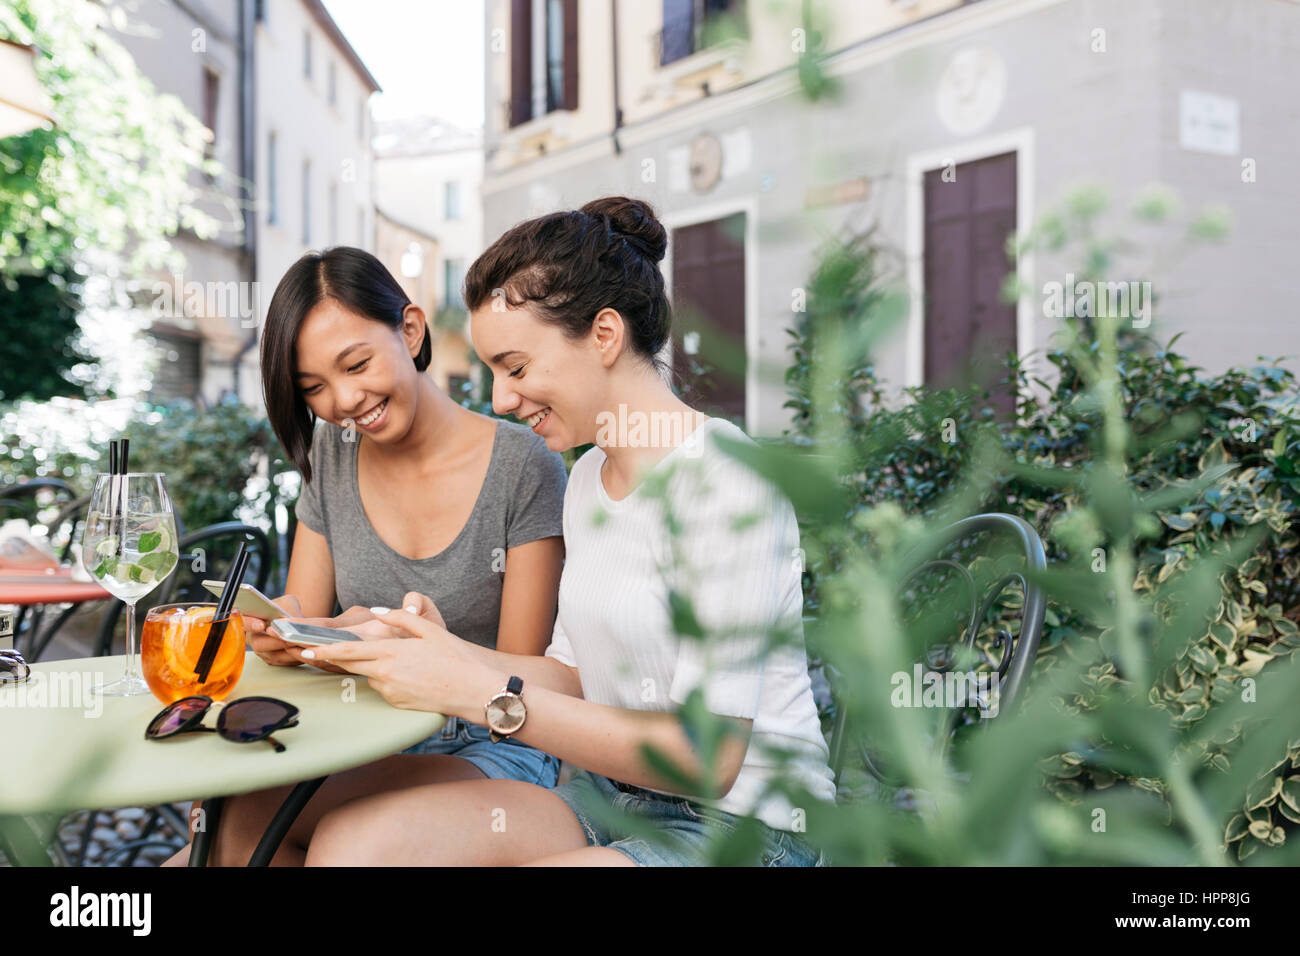 Italy, Padua, two young women checking their cell phones at sidewalk cafe Stock Photo